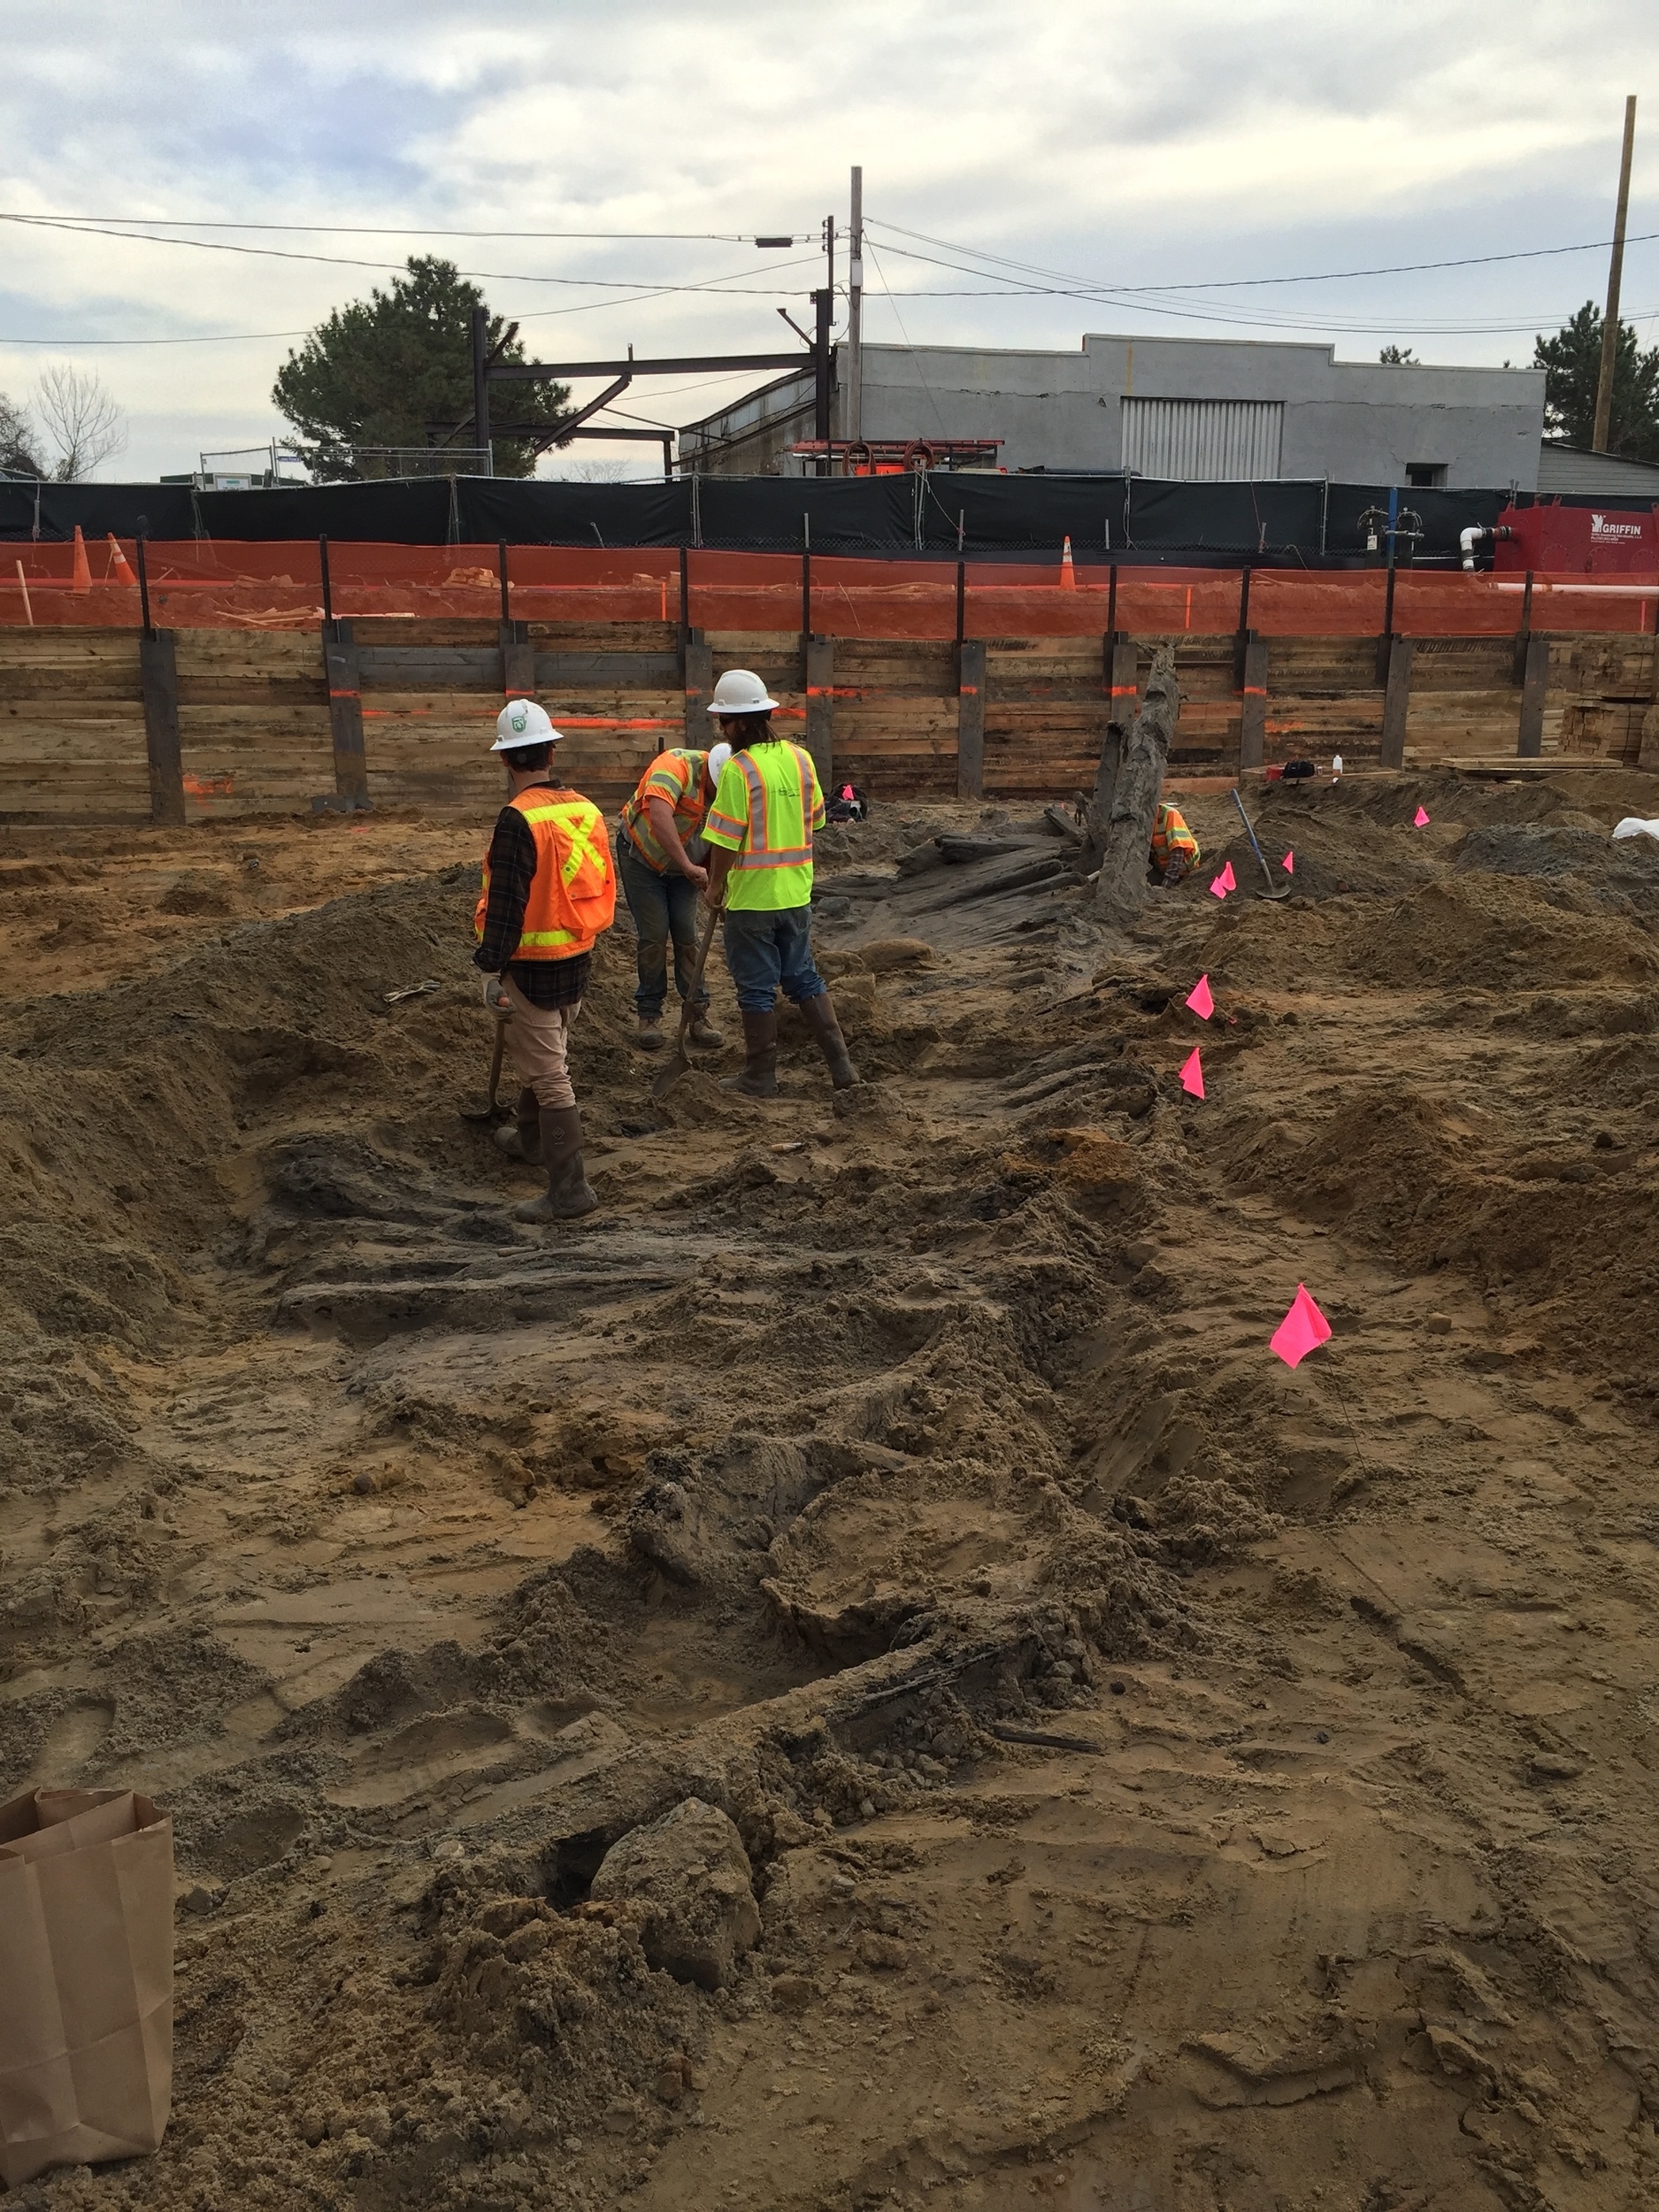   WSSI archeologists Vince Gallacci, Daniel Osborne, and Daniel Baicy work to uncover the ship’s hull.    